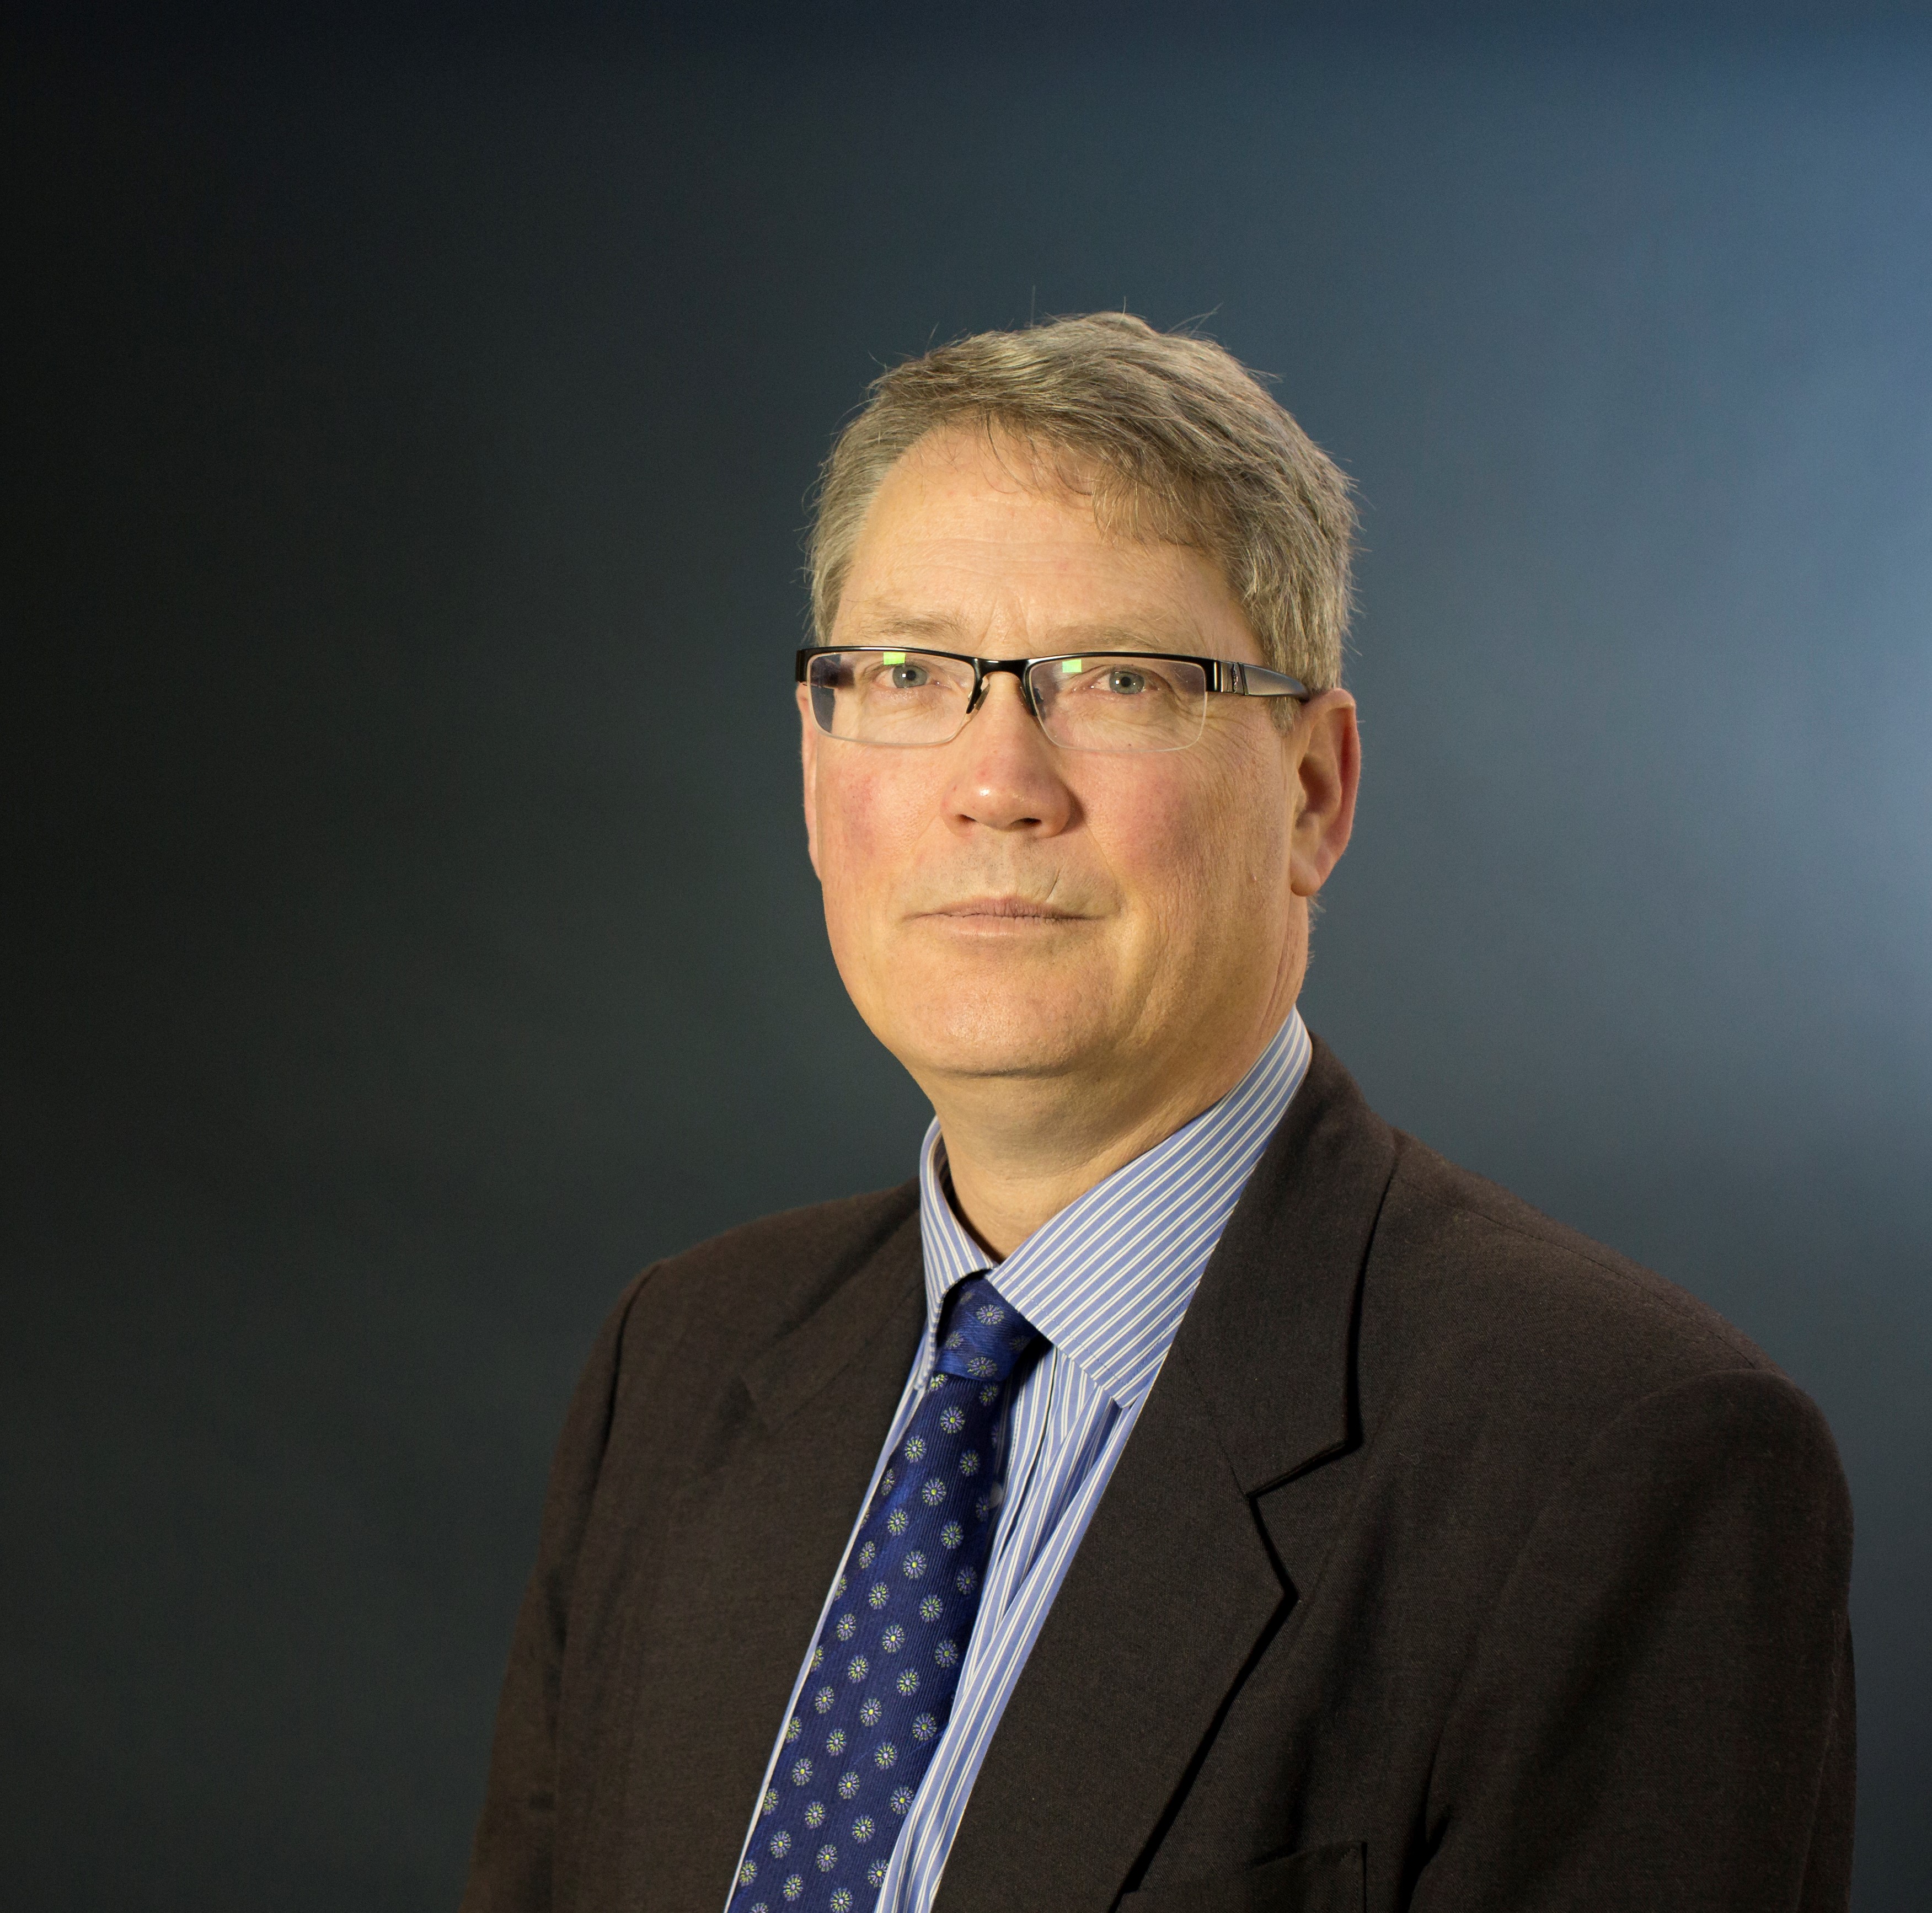 Professor Tim Woods, Pro Vice-Chancellor for Learning, Teaching and Student Experience